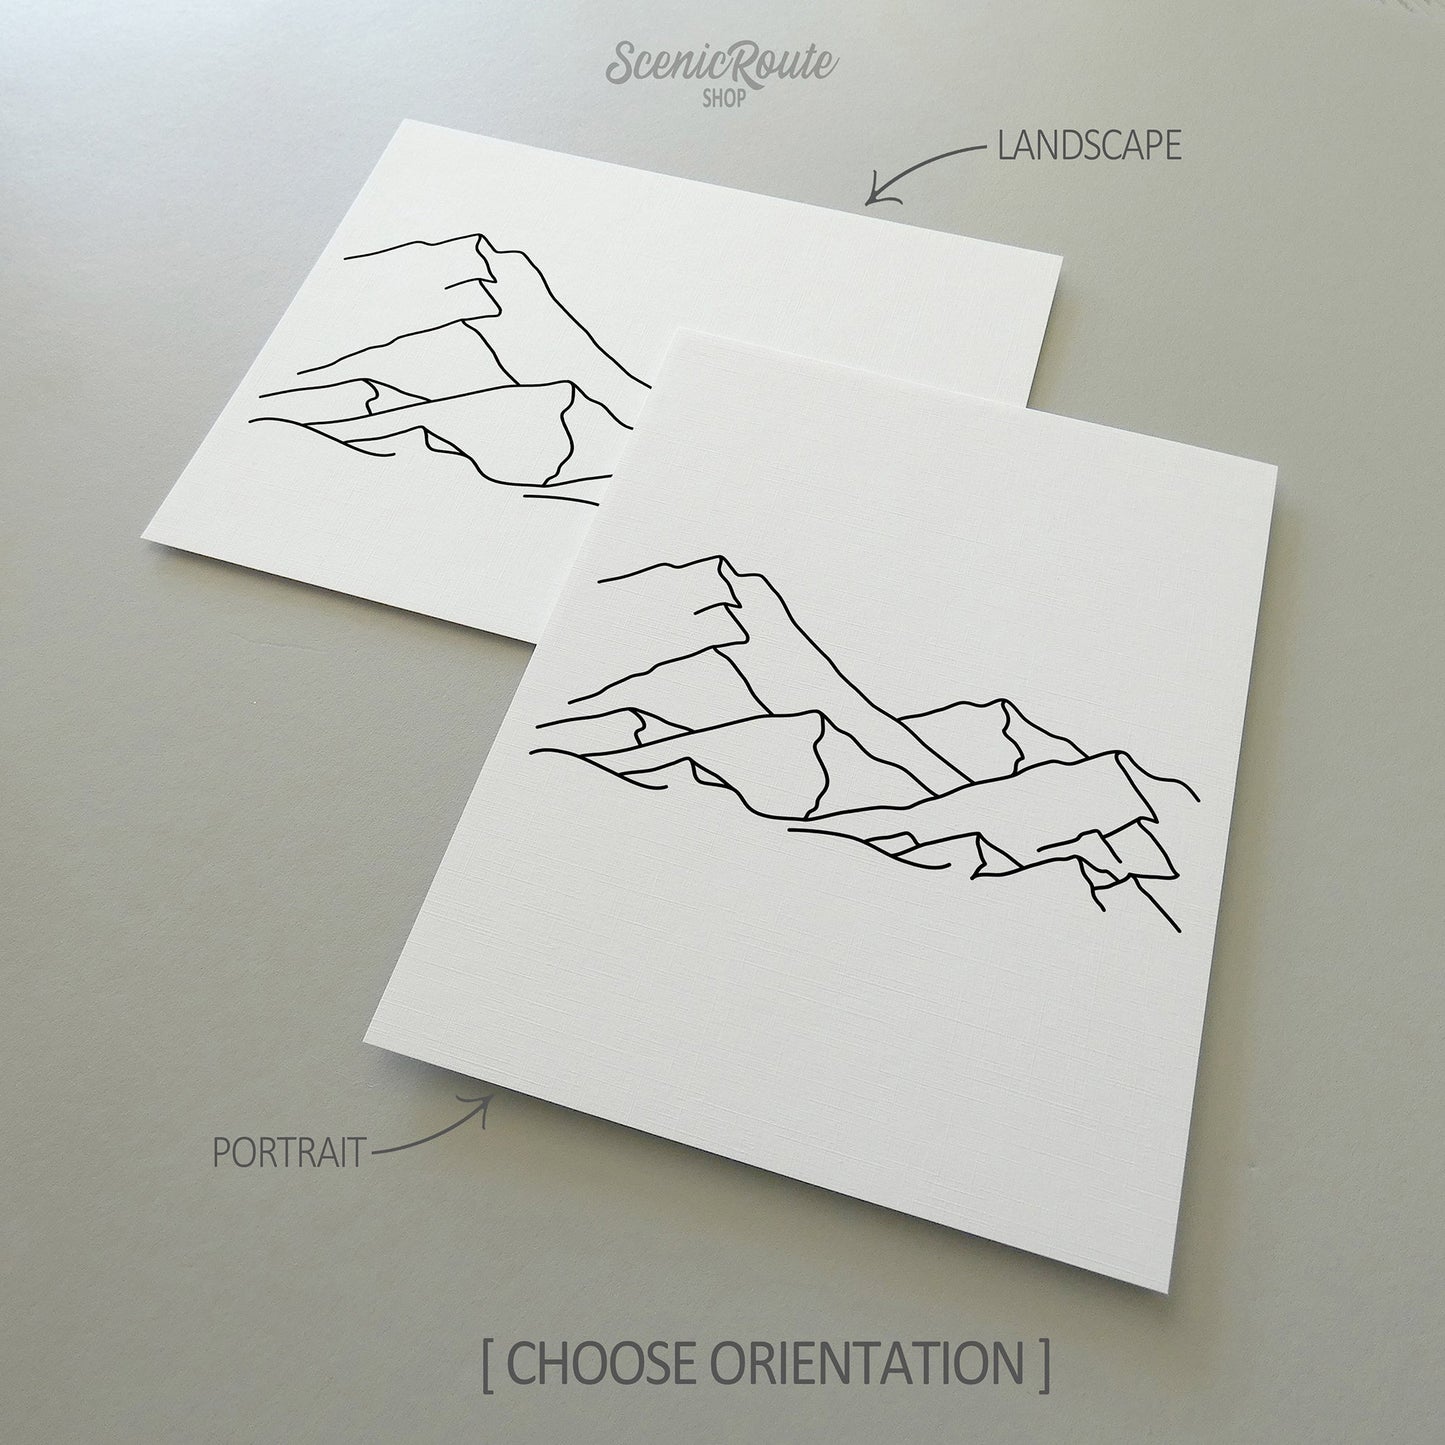 Two line art drawings of A Mountain Range on white linen paper with a gray background.  The pieces are shown in portrait and landscape orientation for the available art print options.